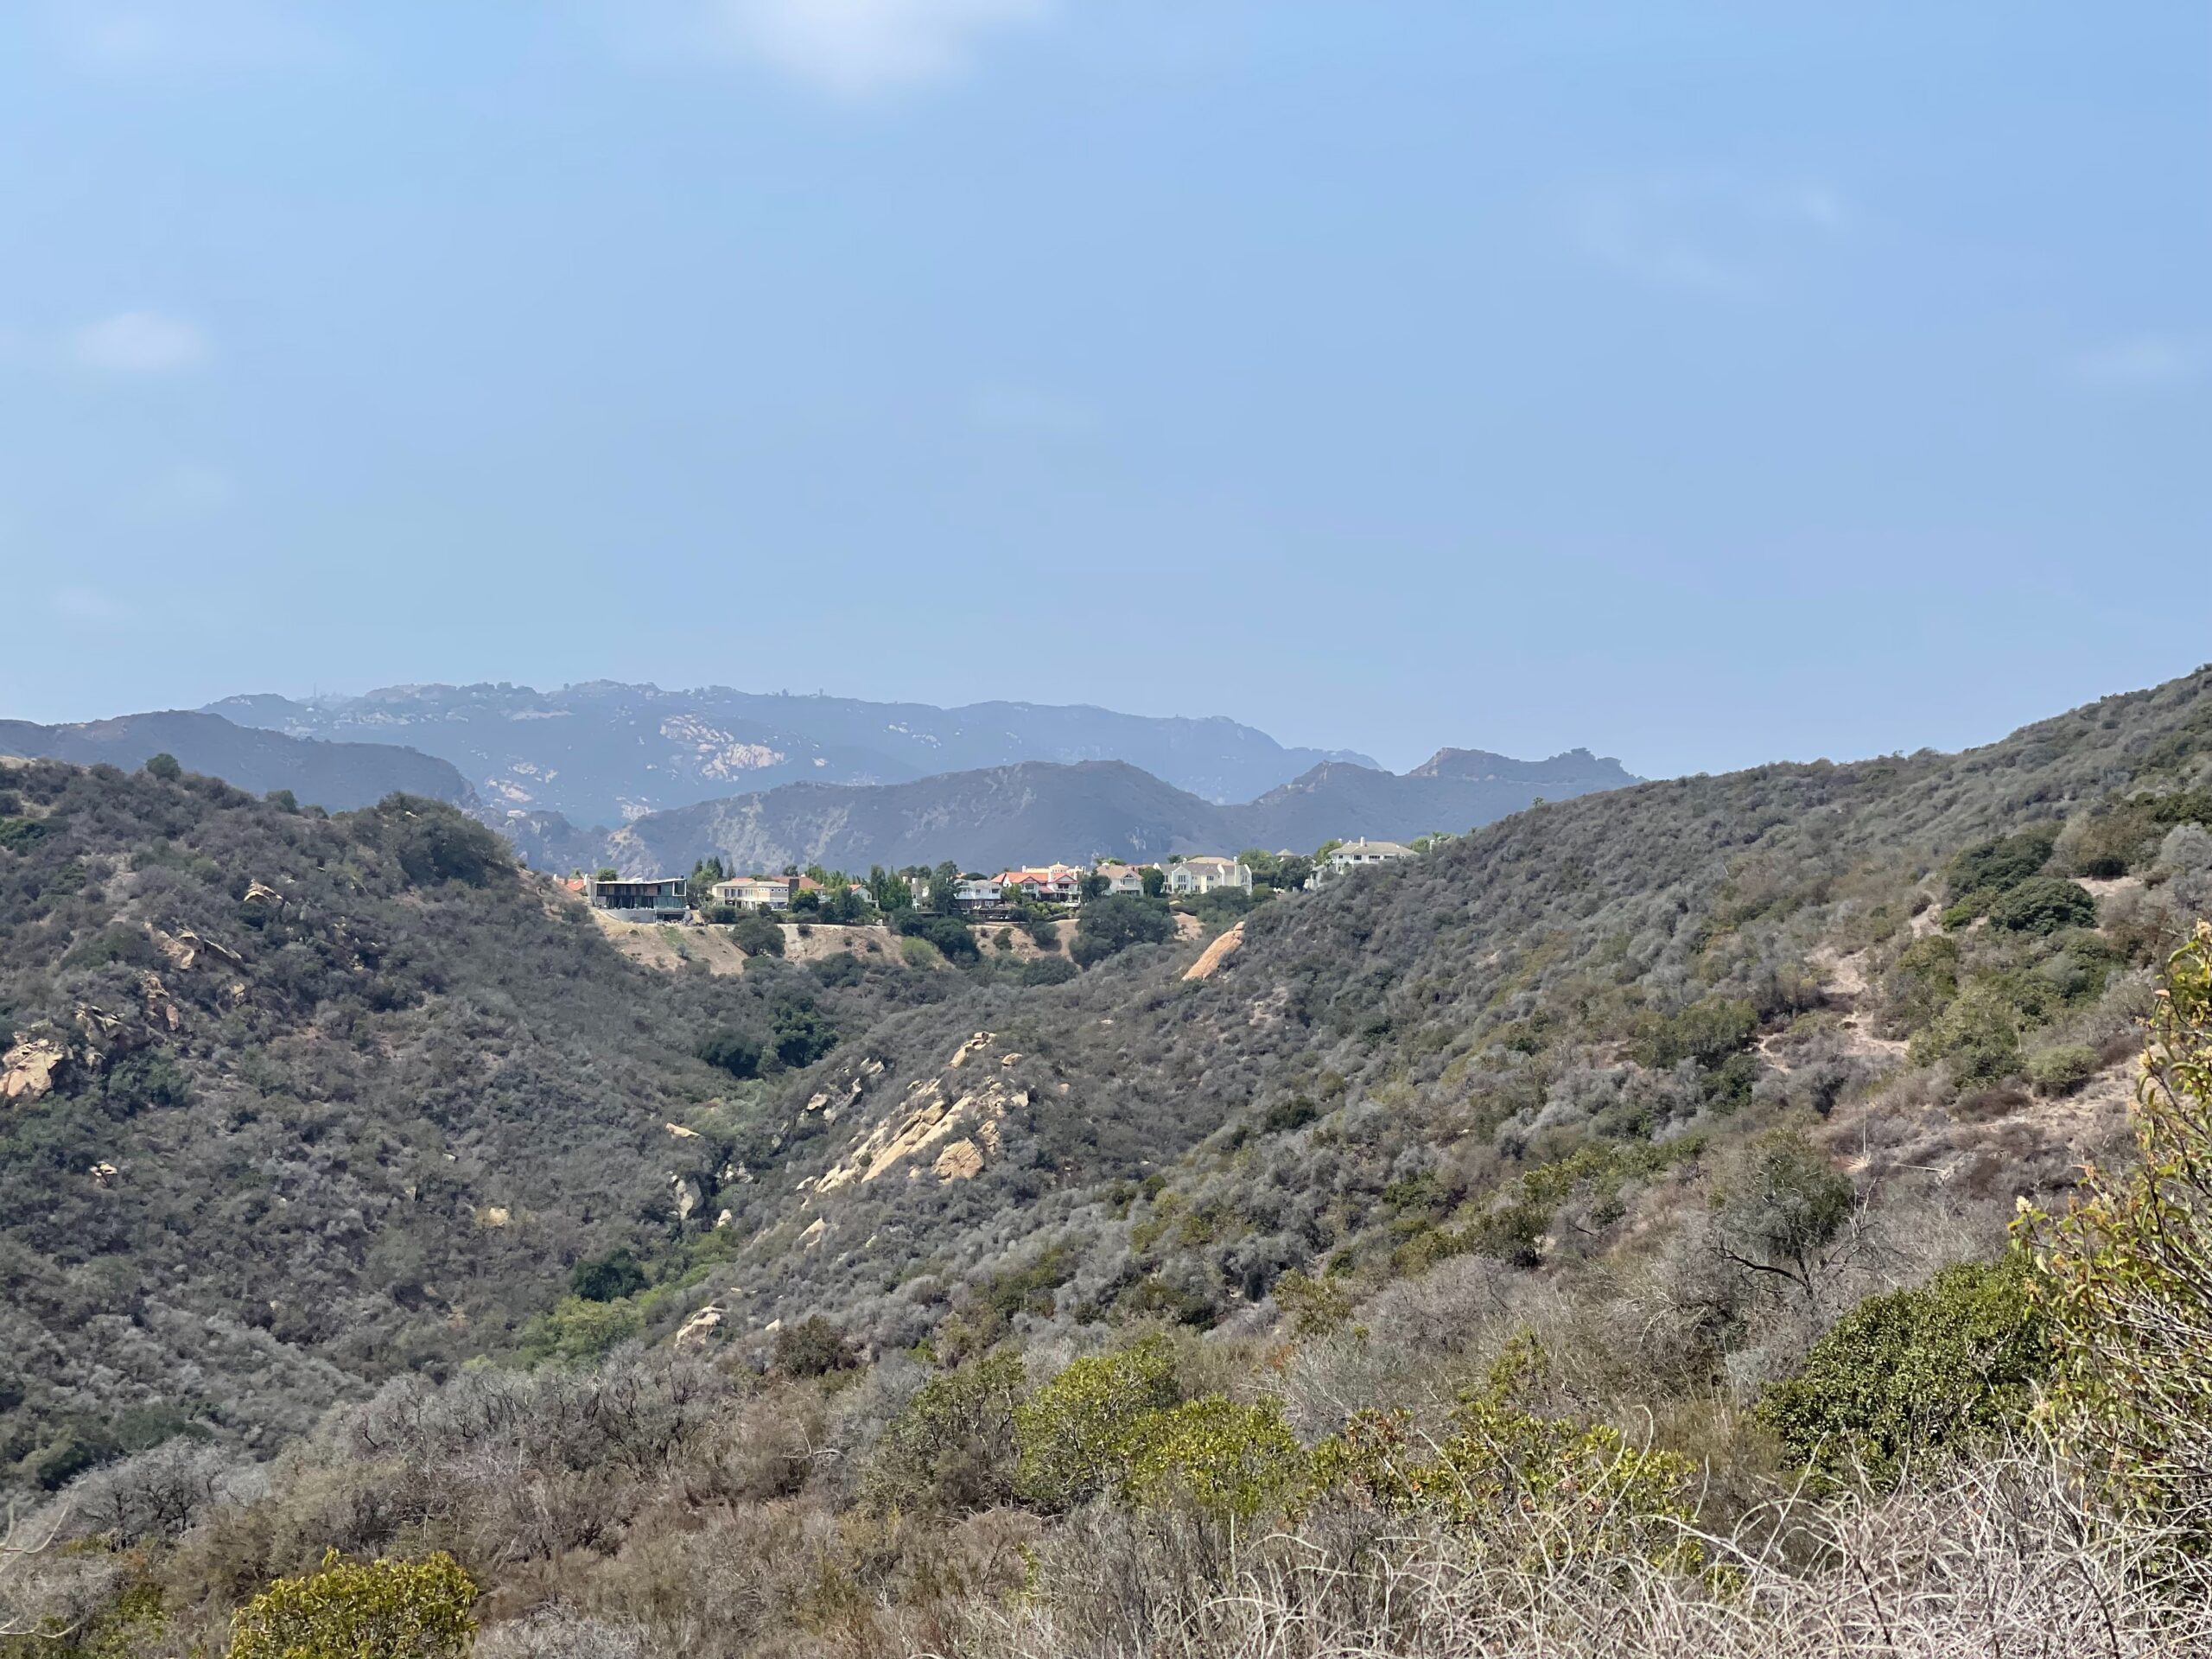 The Santa Monica Mountains are a stunning site in California that were a major filming location for the television series “MASH”.
Pictured: the Santa Monica Mountains and green shrubbery with a town in the distance 